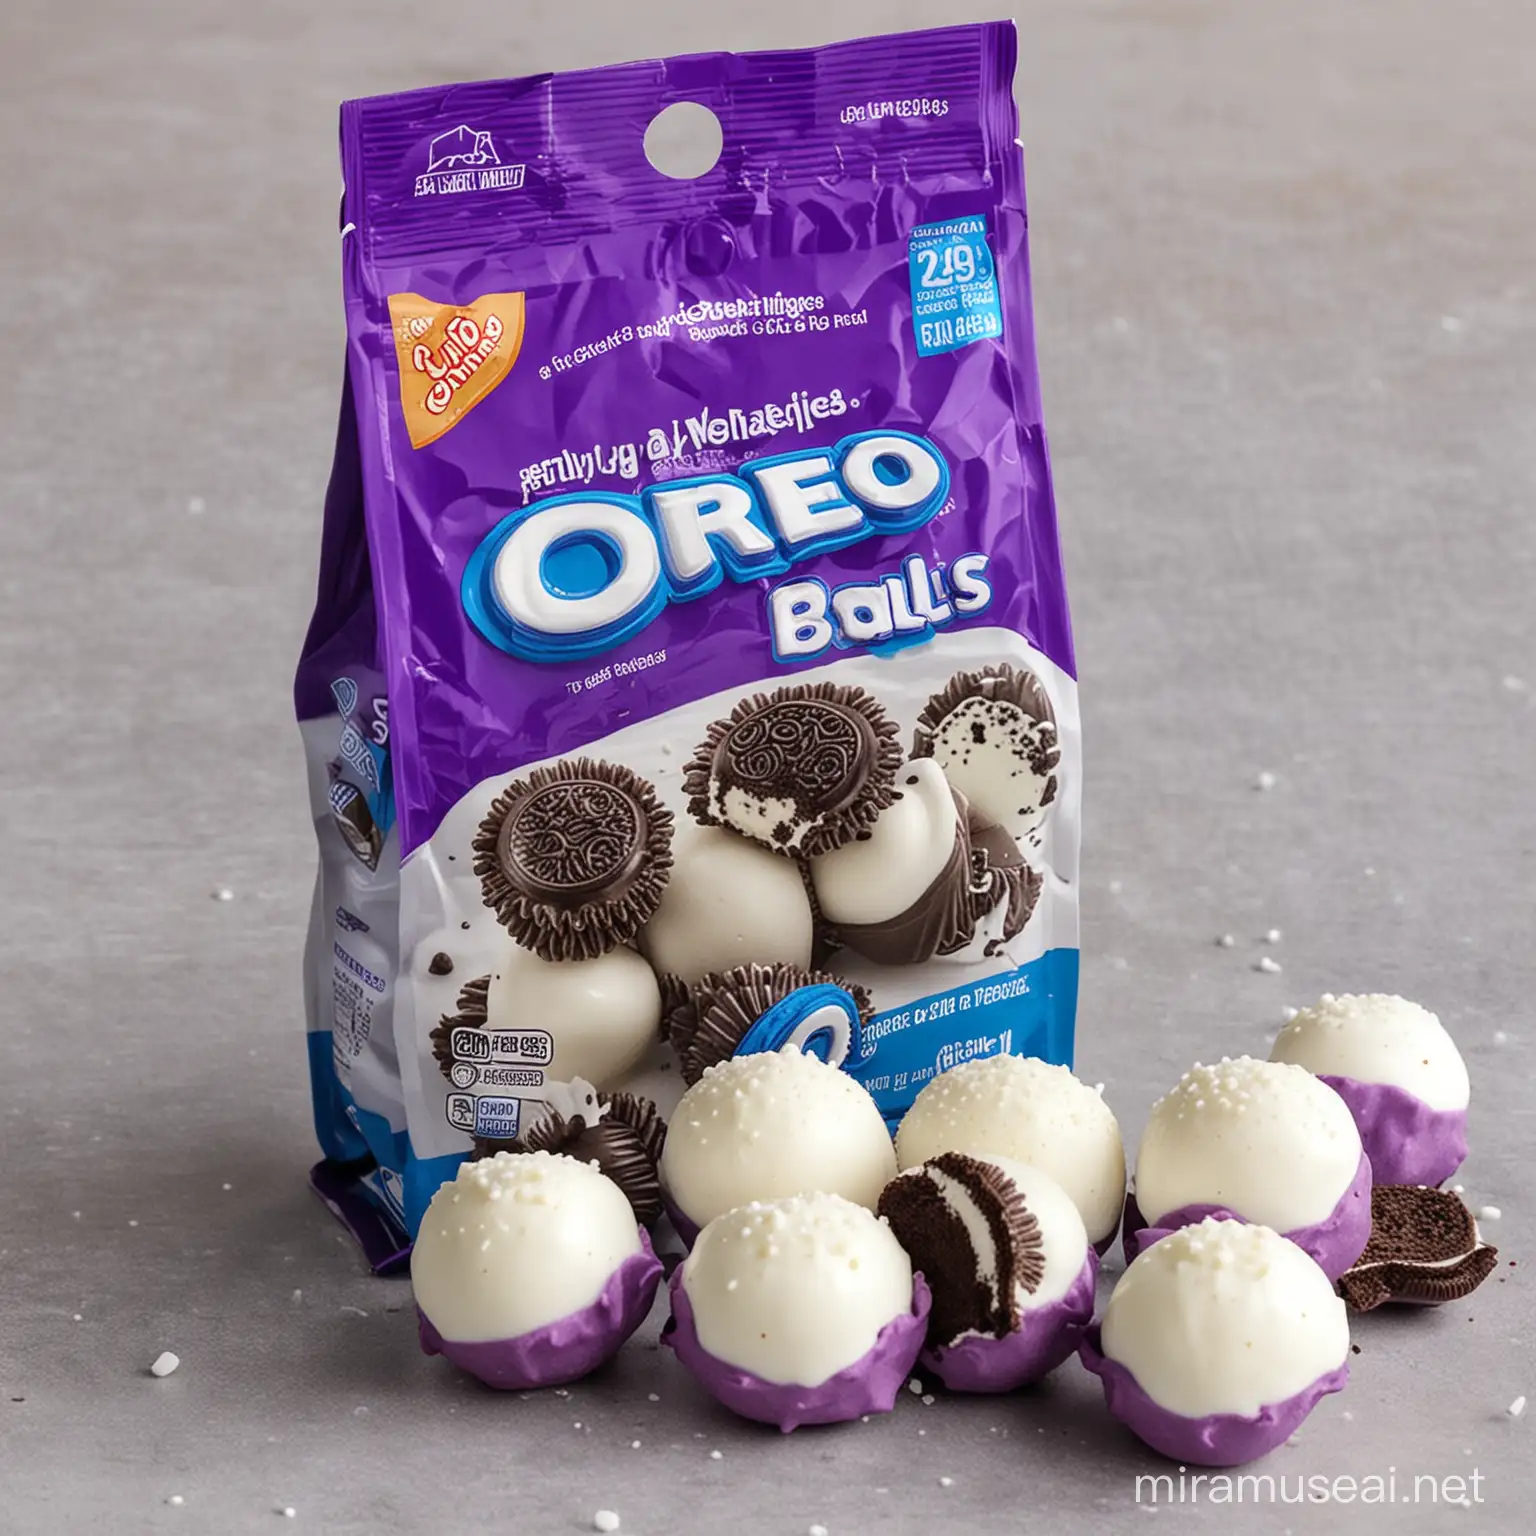 Delicious Oreo Balls in Vibrant Purple and White Packaging